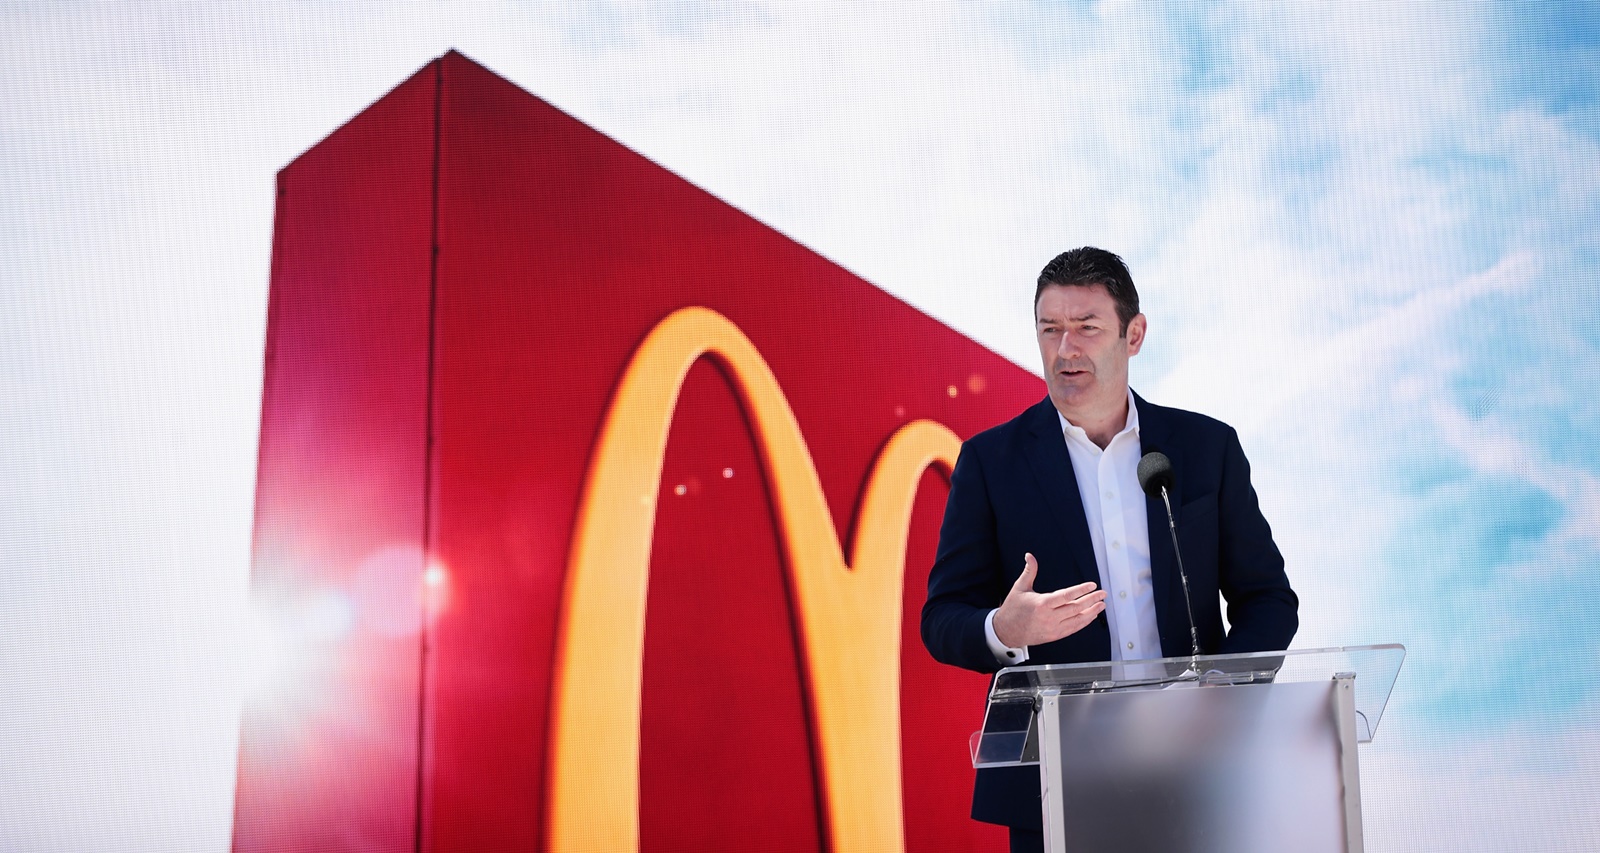 Steve Easterbrook Net Worth 2019: How Rich Is the McDonald’s CEO When He Was Fired?